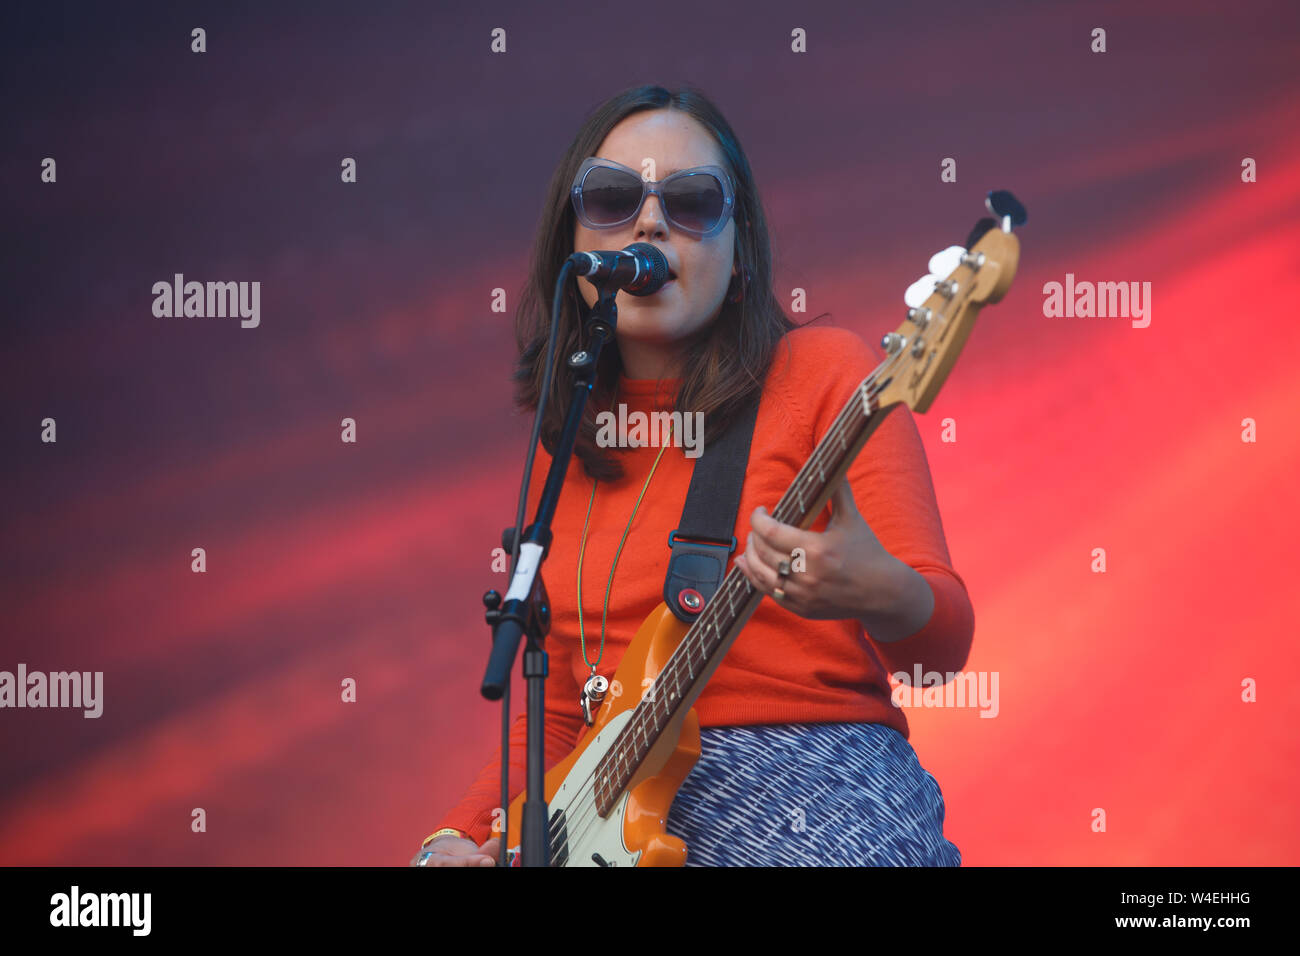 Jodrell Bank, Cheshire. 21st July, 2019. transmissions perform live on the Main Stage at Bluedot Festival 2019 held in the shadow of the Lovell Telescope. Stock Photo